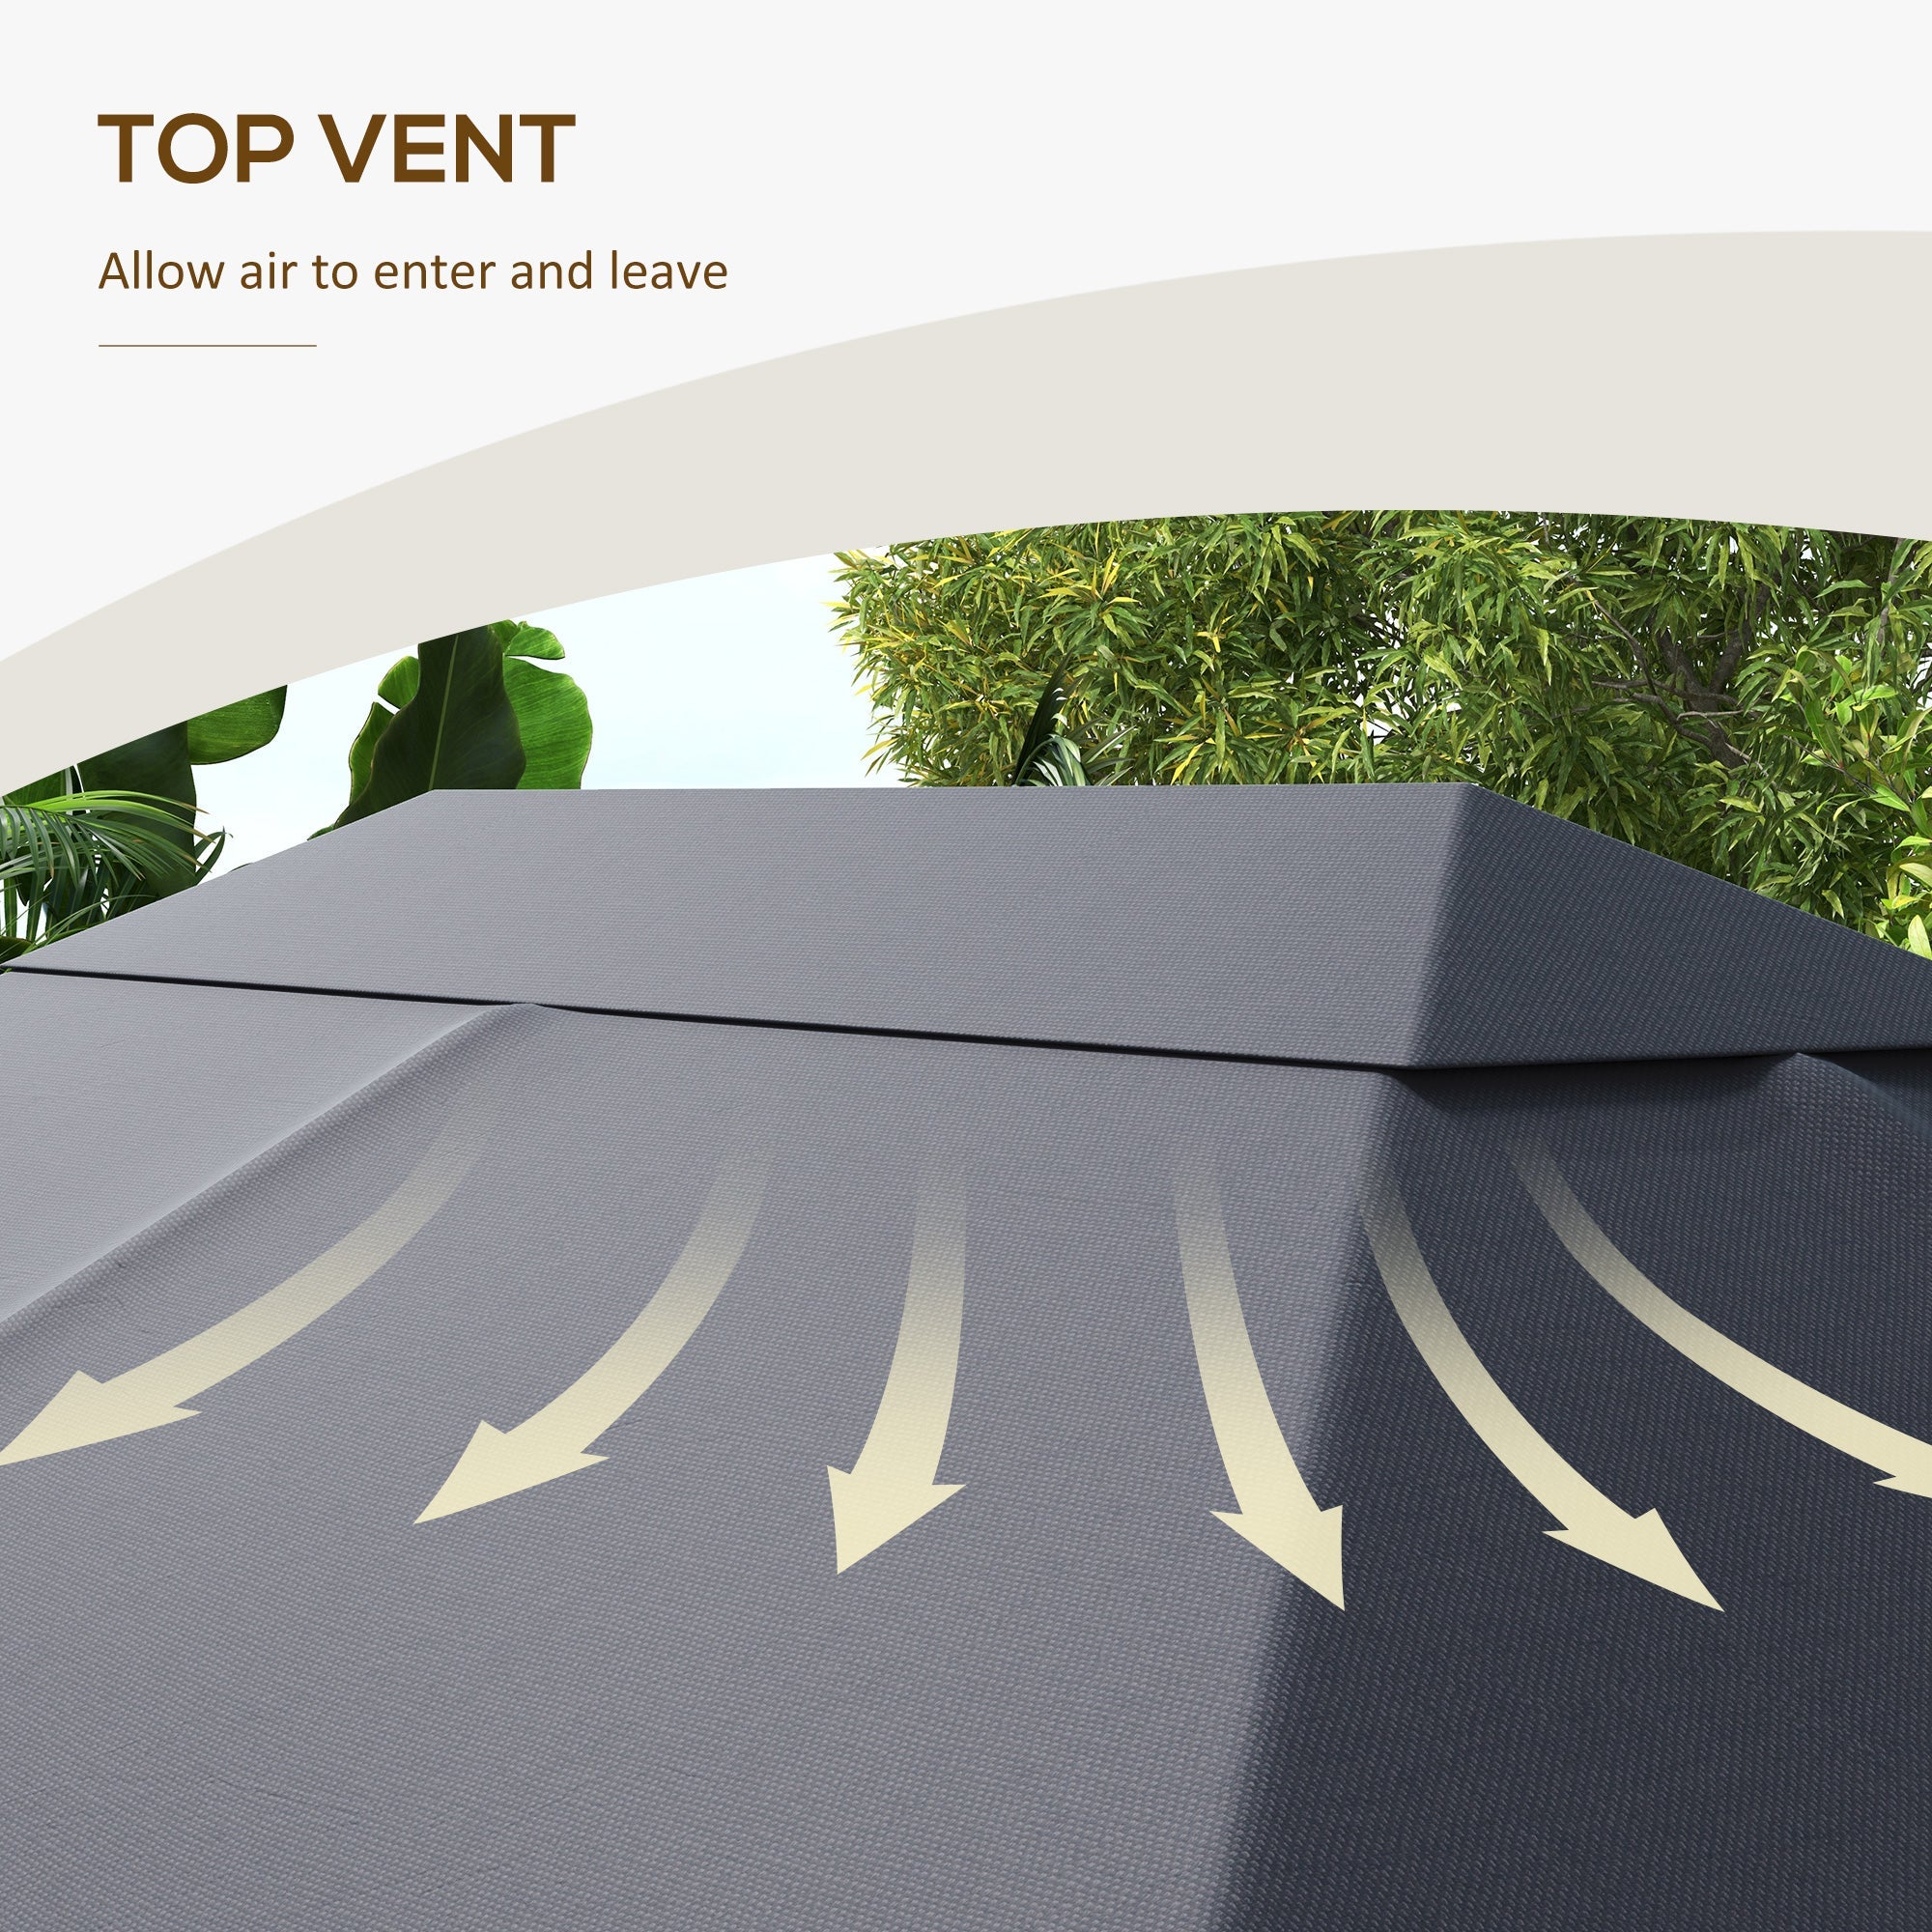 3 x 4m Gazebo Canopy Replacement Cover, Gazebo Roof Replacement (TOP COVER ONLY), Dark Grey-4